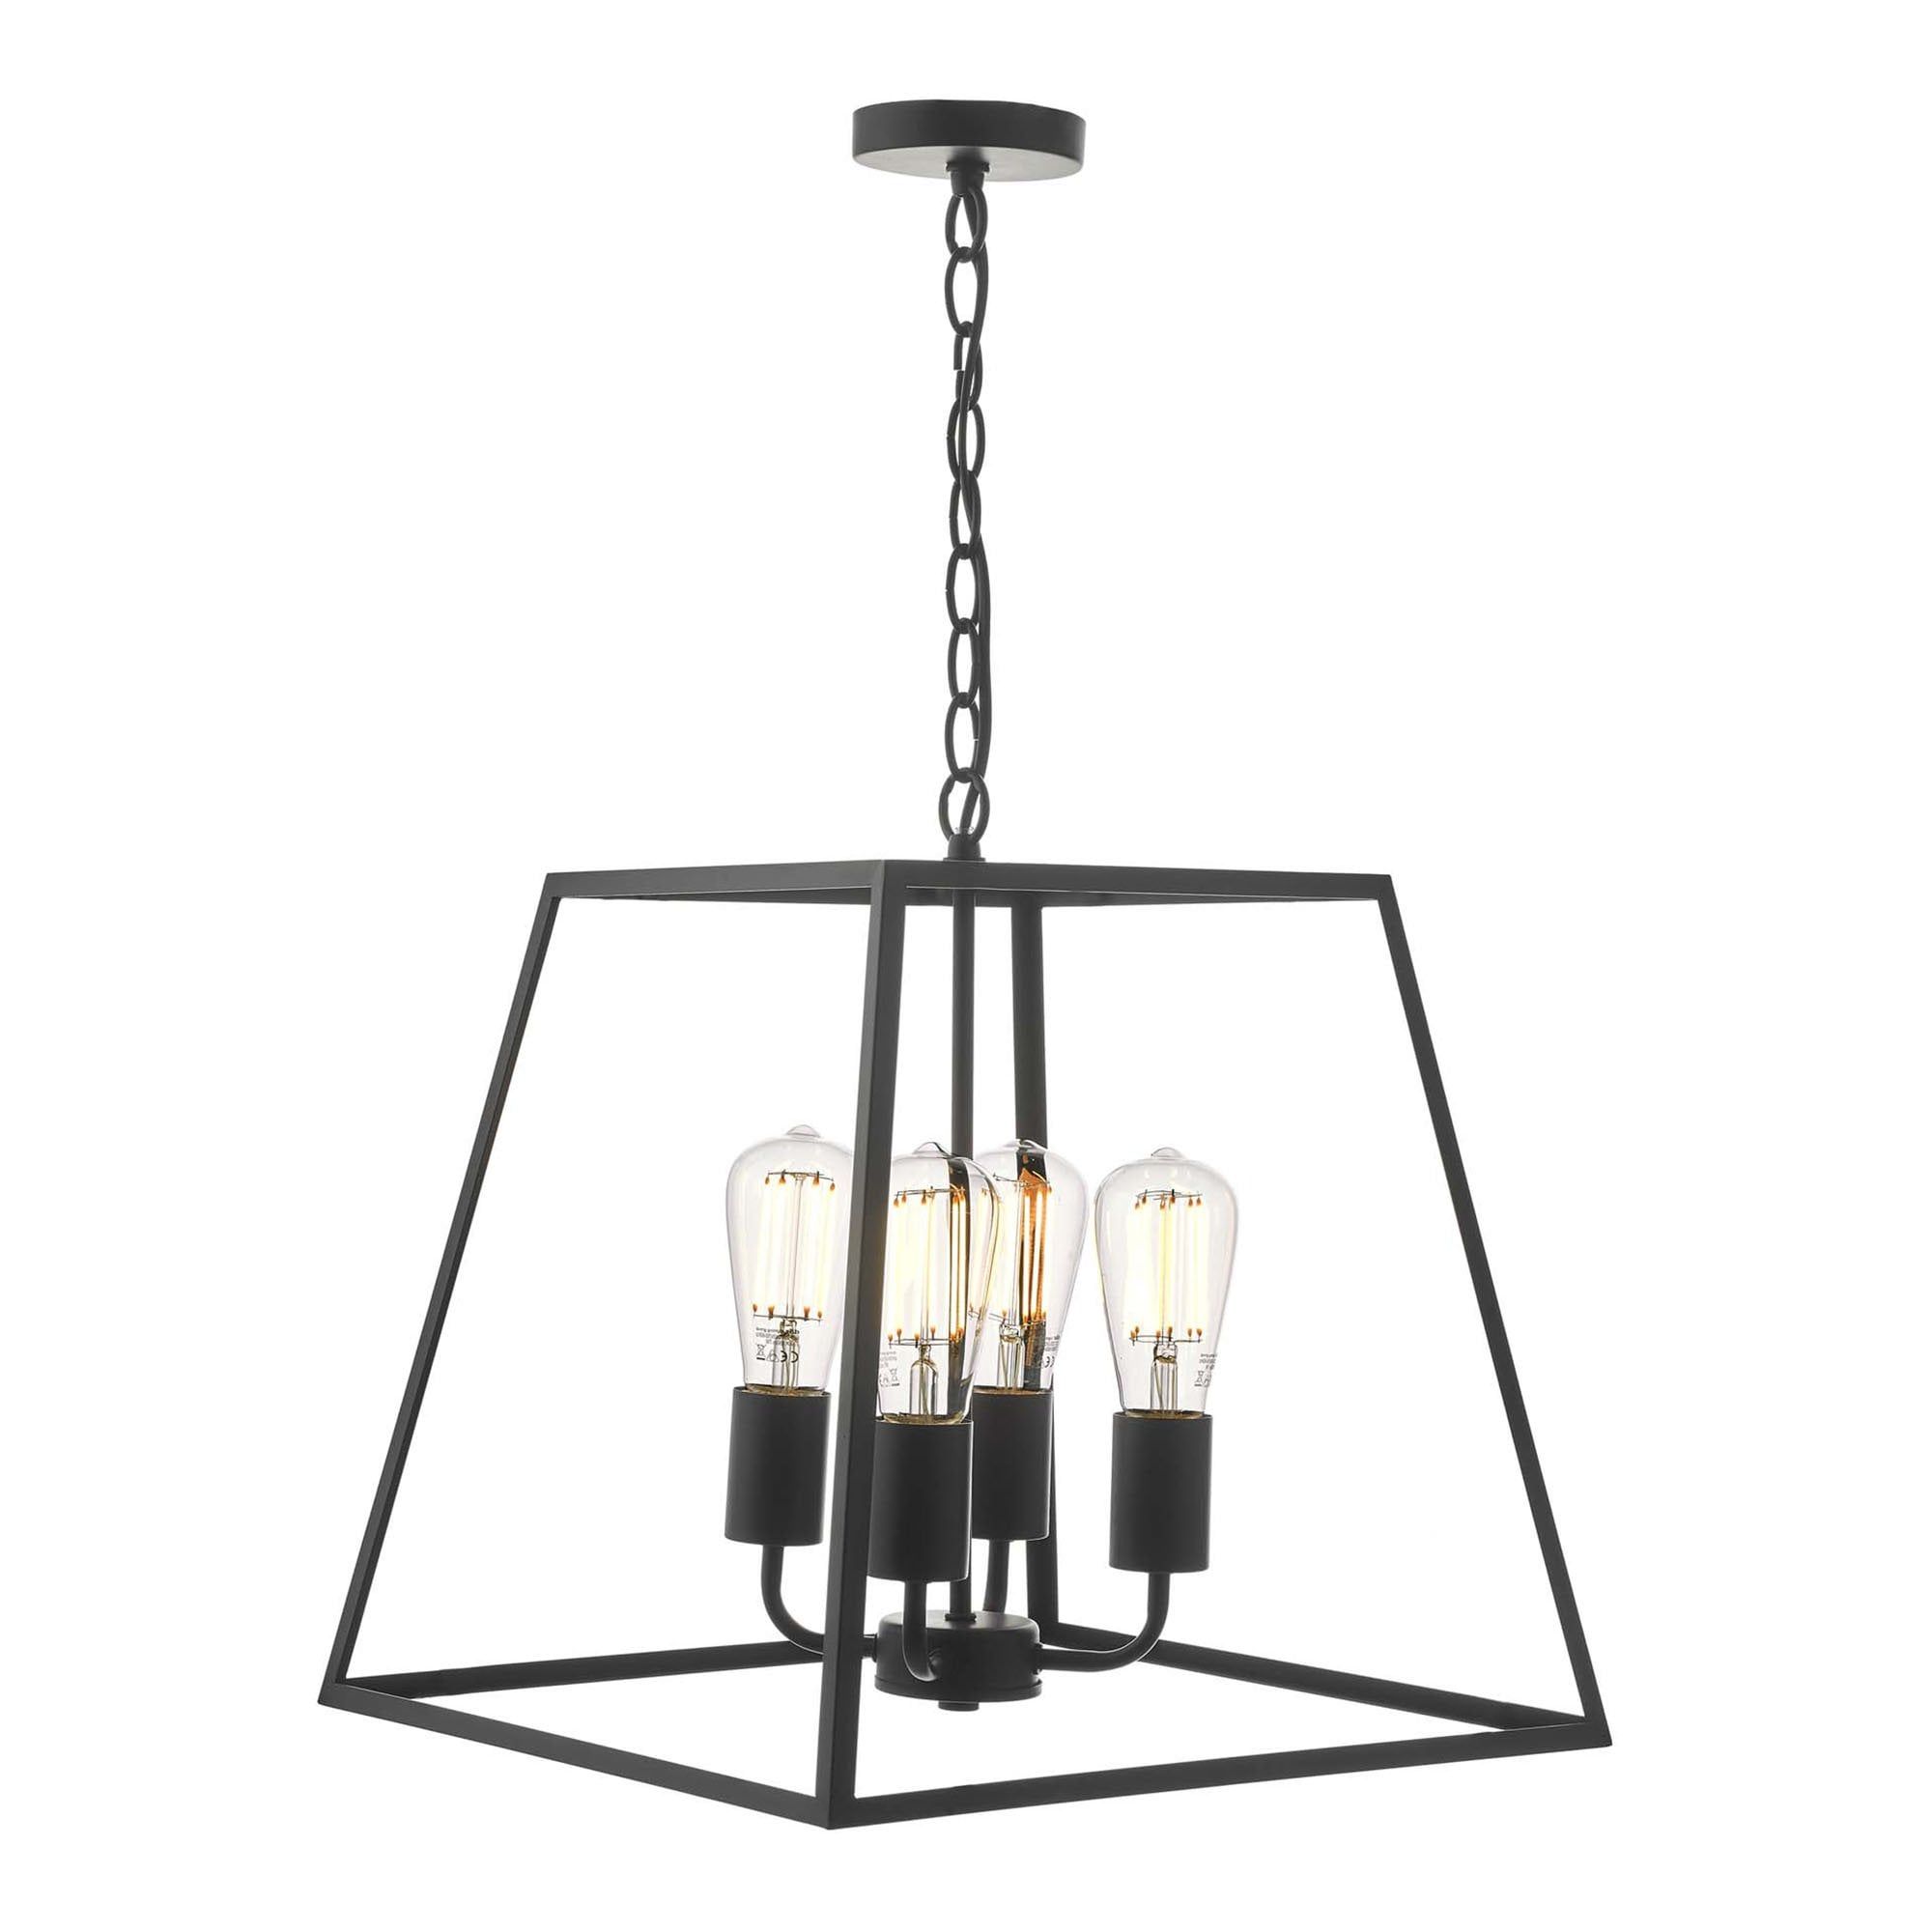 Famous Open Frame 3 Light Ceiling Pendant Lantern In Black Finish Within Textured Black Lantern Chandeliers (View 3 of 15)